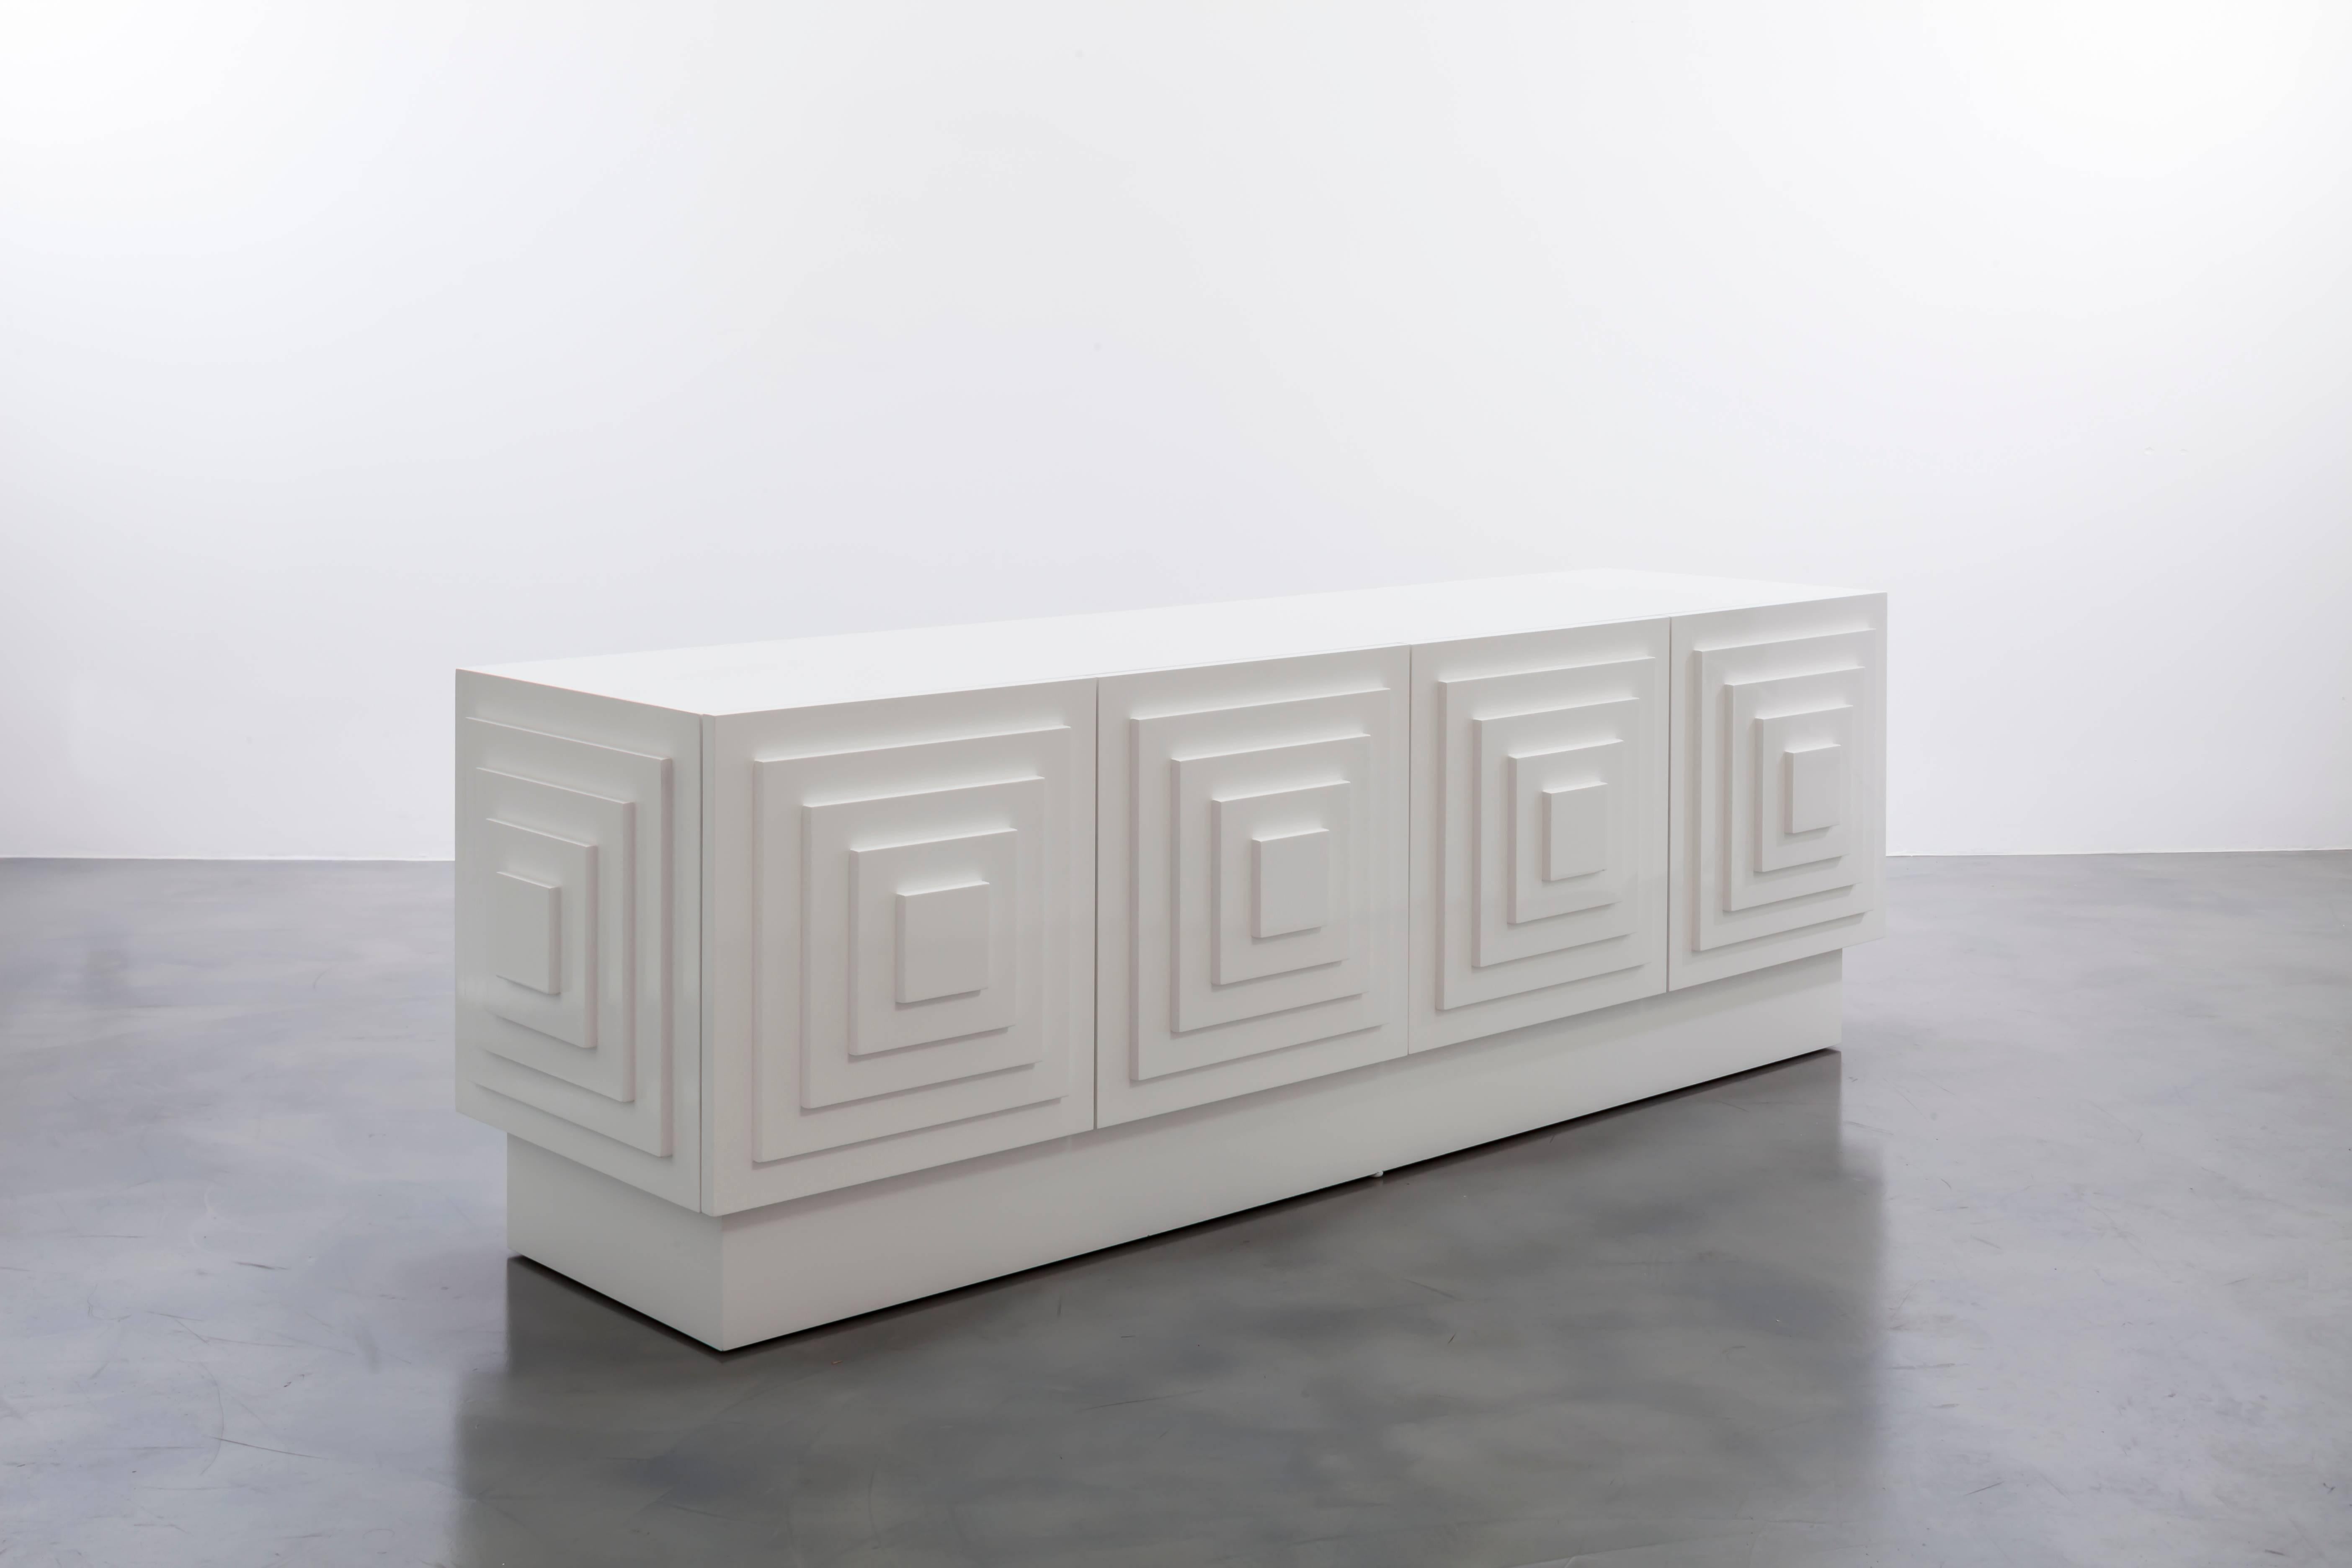 GAULTIER MEDIA CREDENZA - Modern Geometric Cabinet in White Lacquer

The Gaultier Media Credenza is a stylish and functional piece of furniture designed to enhance your media storage and display capabilities. It combines a sleek lacquered finish